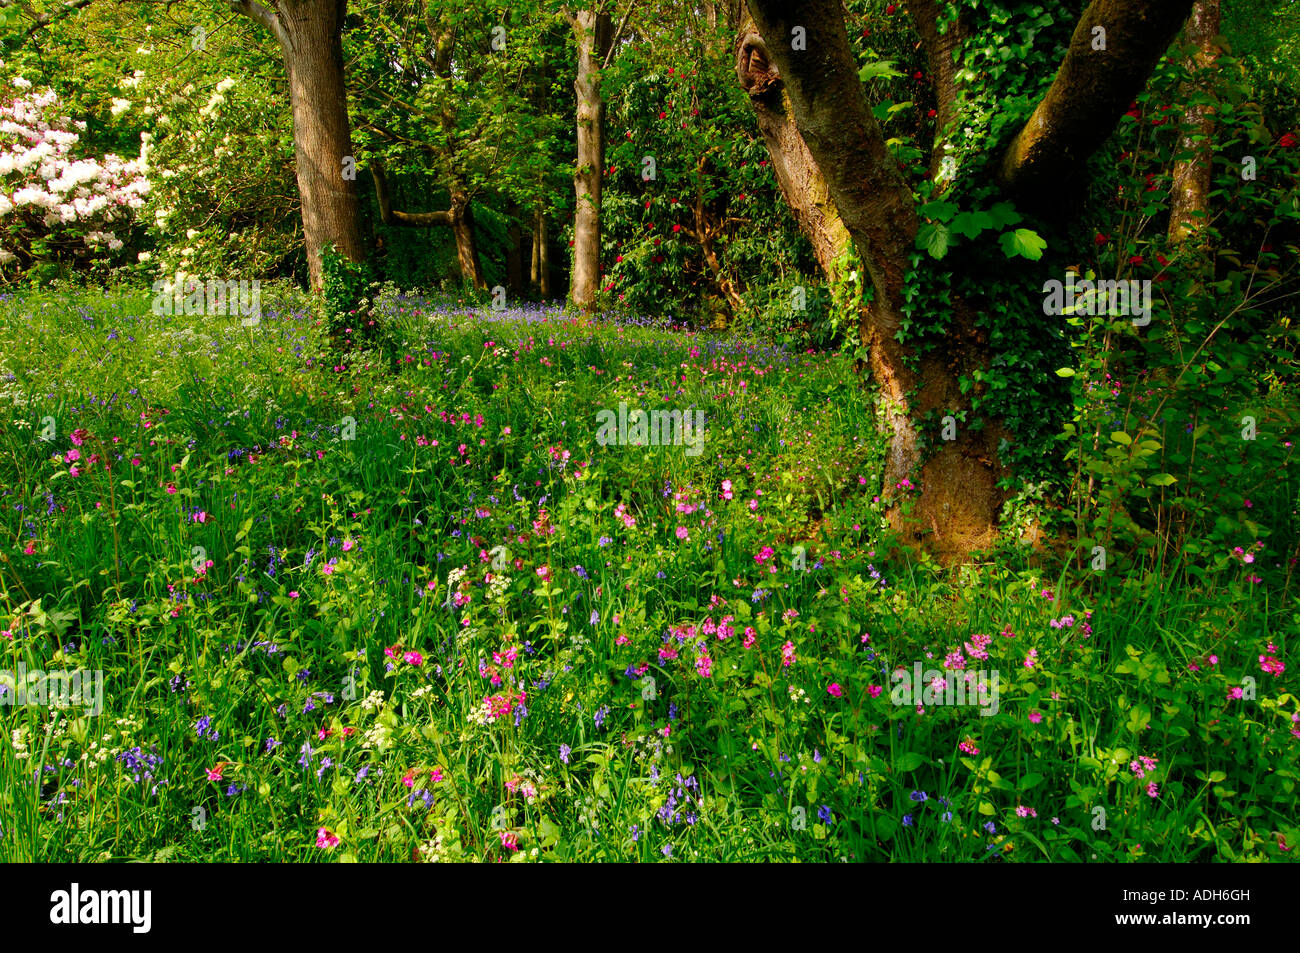 Carpet of bluebells and Pink Campion in a thinly wooded copse Stock Photo